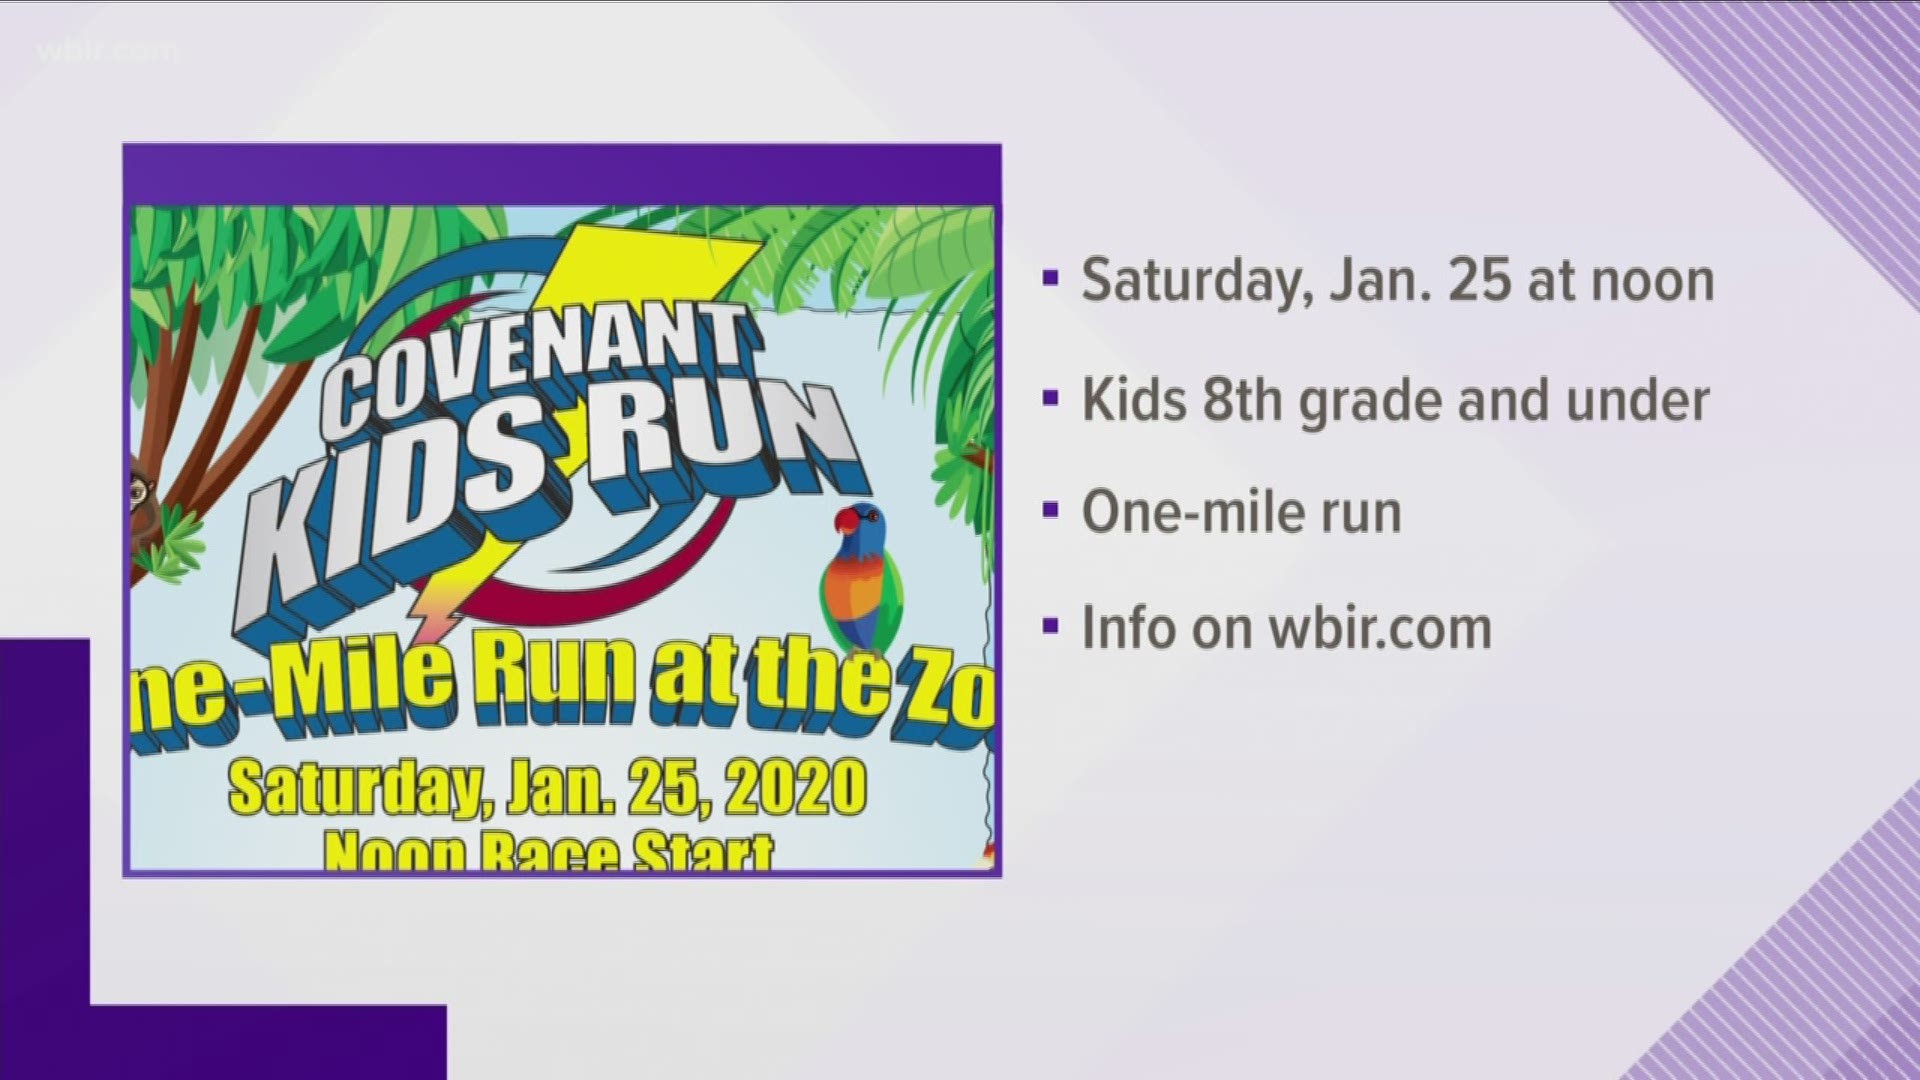 Zoo Knoxville hosts the Covenant Kids Run on January 25, 2020. Kids 8th grade and younger run one mile. $20 fee to enter. Includes zoo admission.